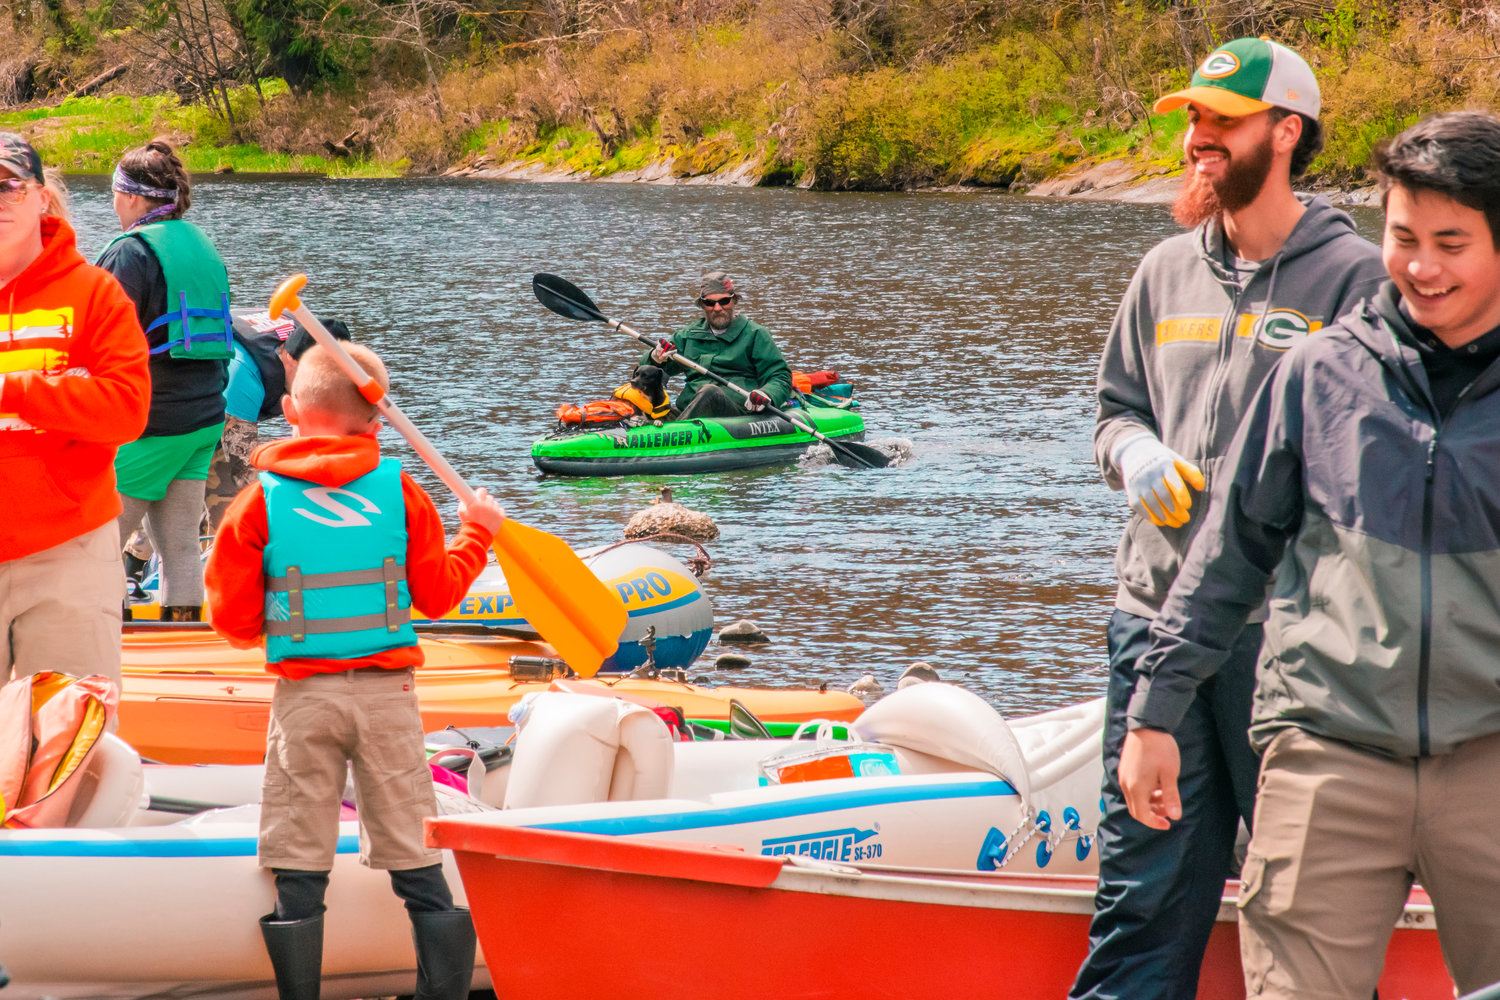 Attendees prepare to launch into the Chehalis River during the Pe Ell River Run on Saturday.